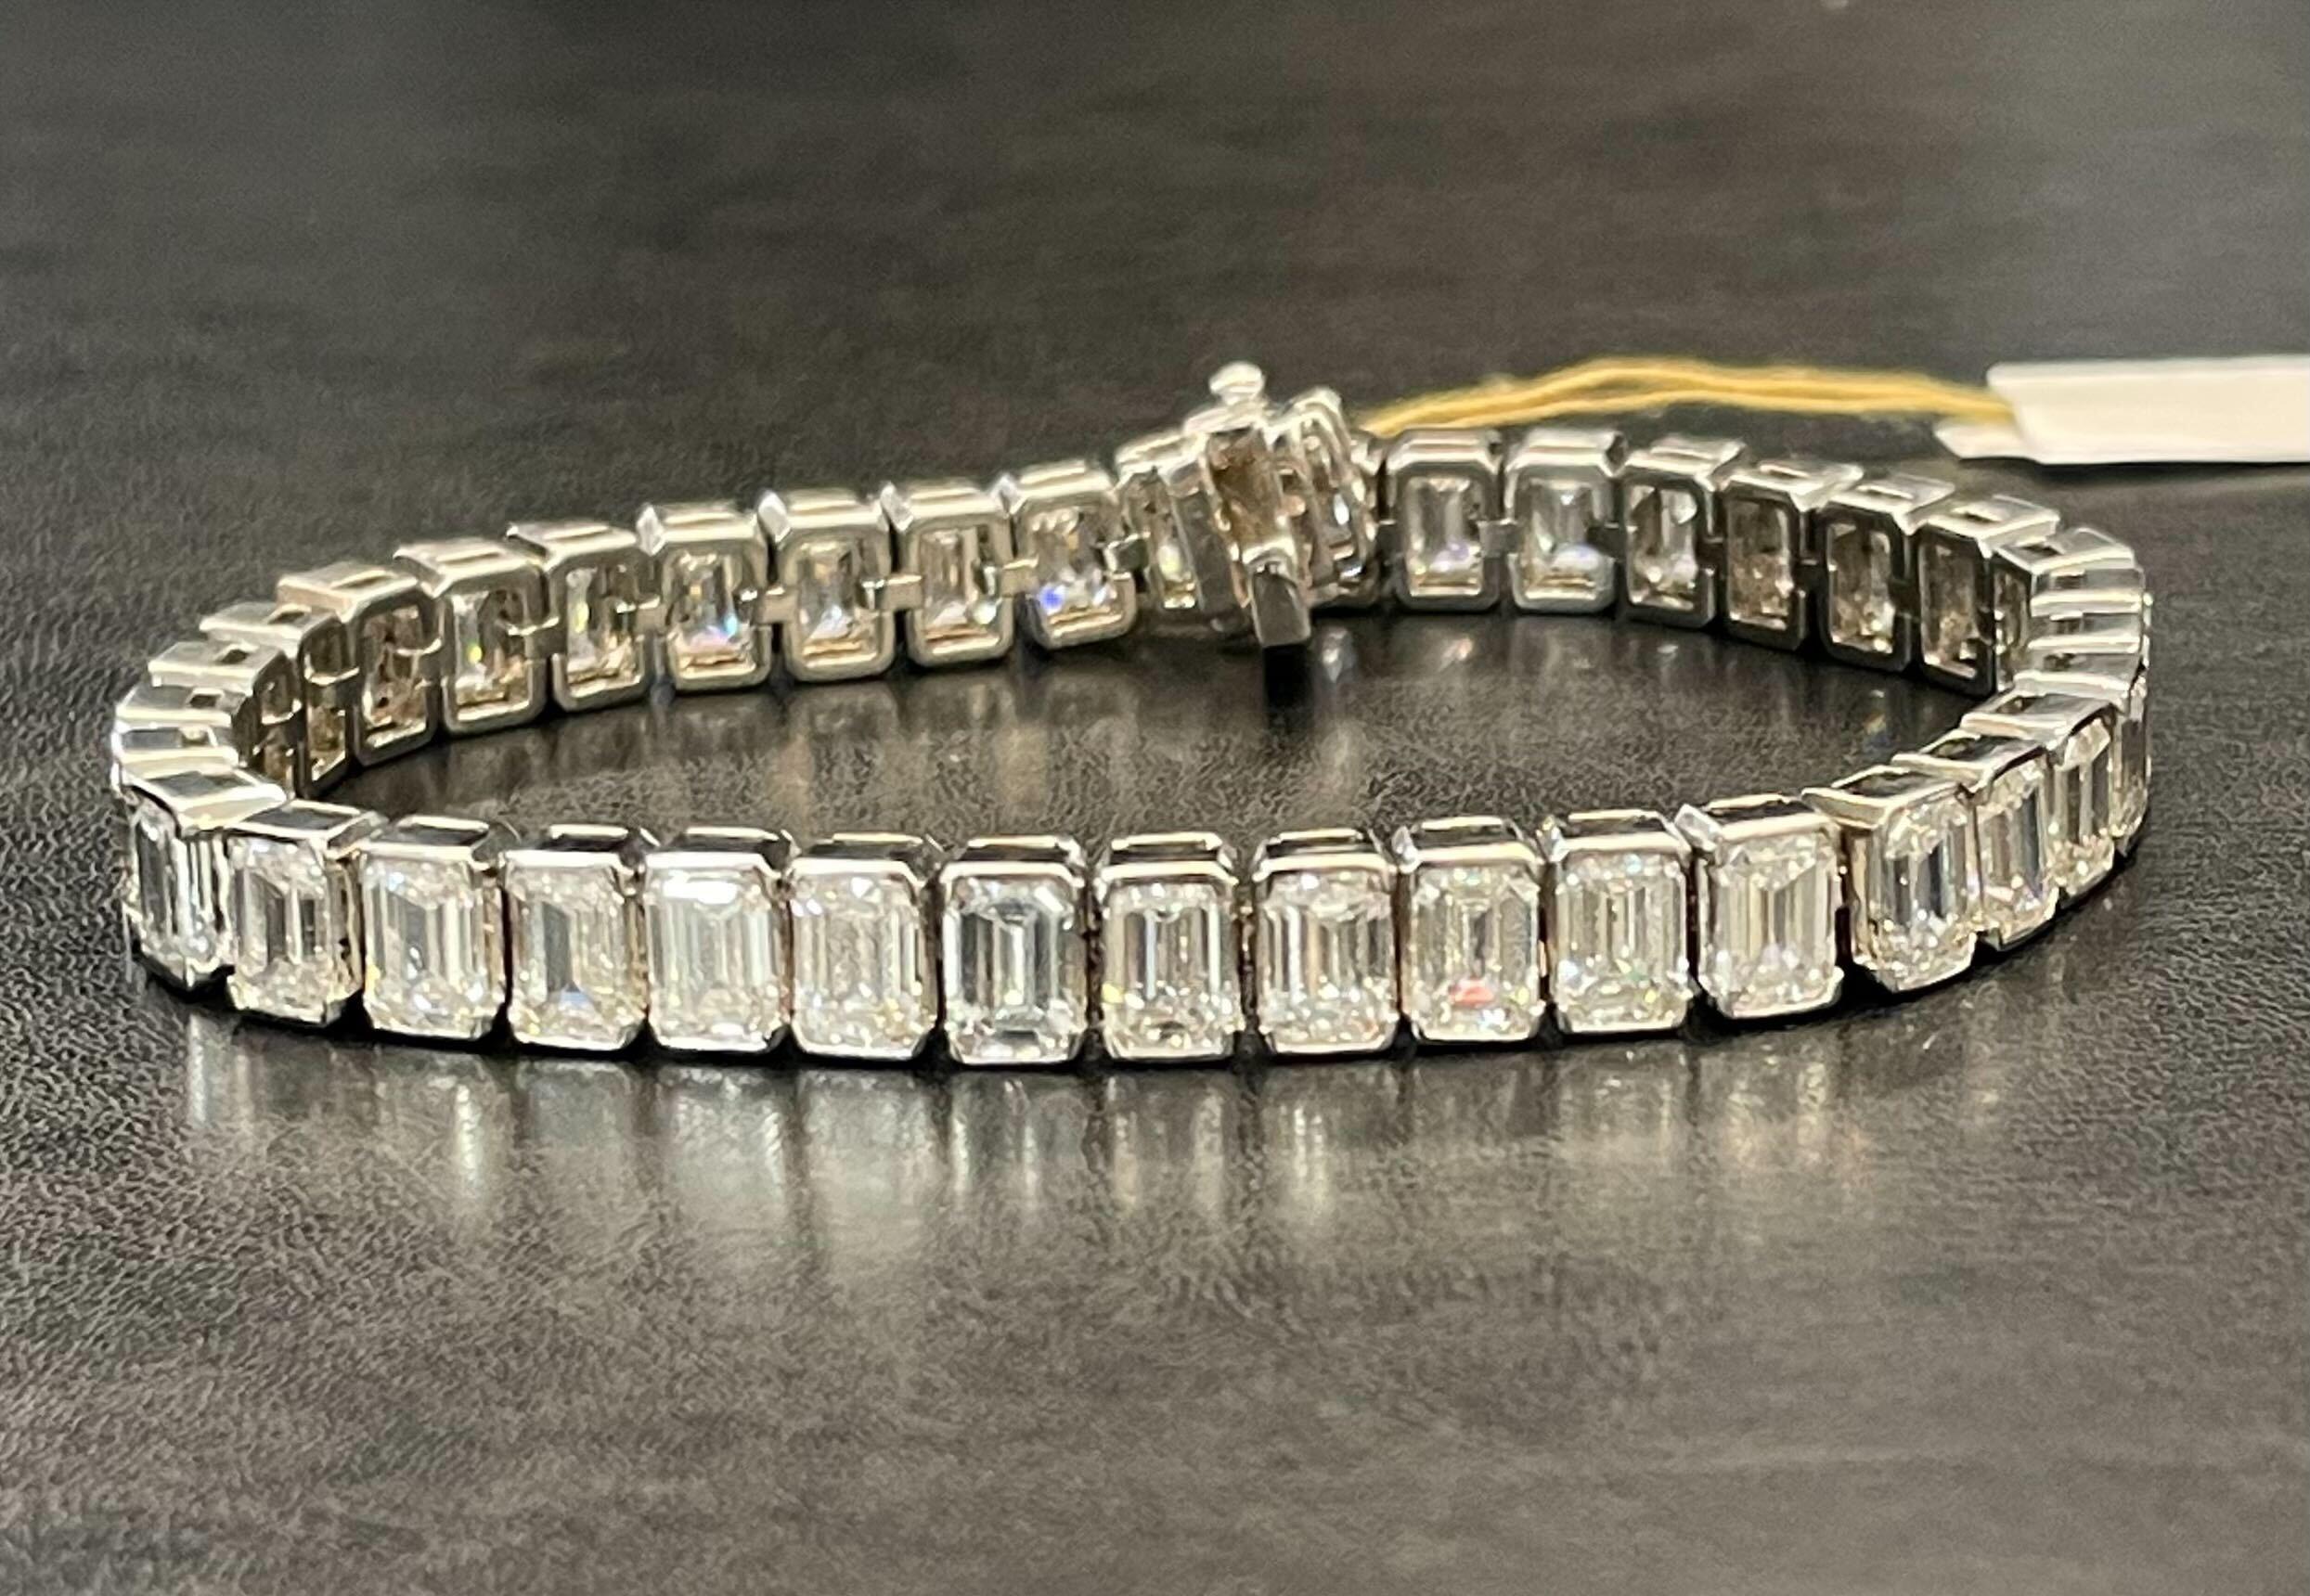 The bracelet is made of 14k white gold and features a combination of lab-grown diamonds and emeralds. The lab-grown diamonds have a high quality with DEF color and VVS2-VS1 clarity, while the emeralds are of unspecified cut but likely chosen to